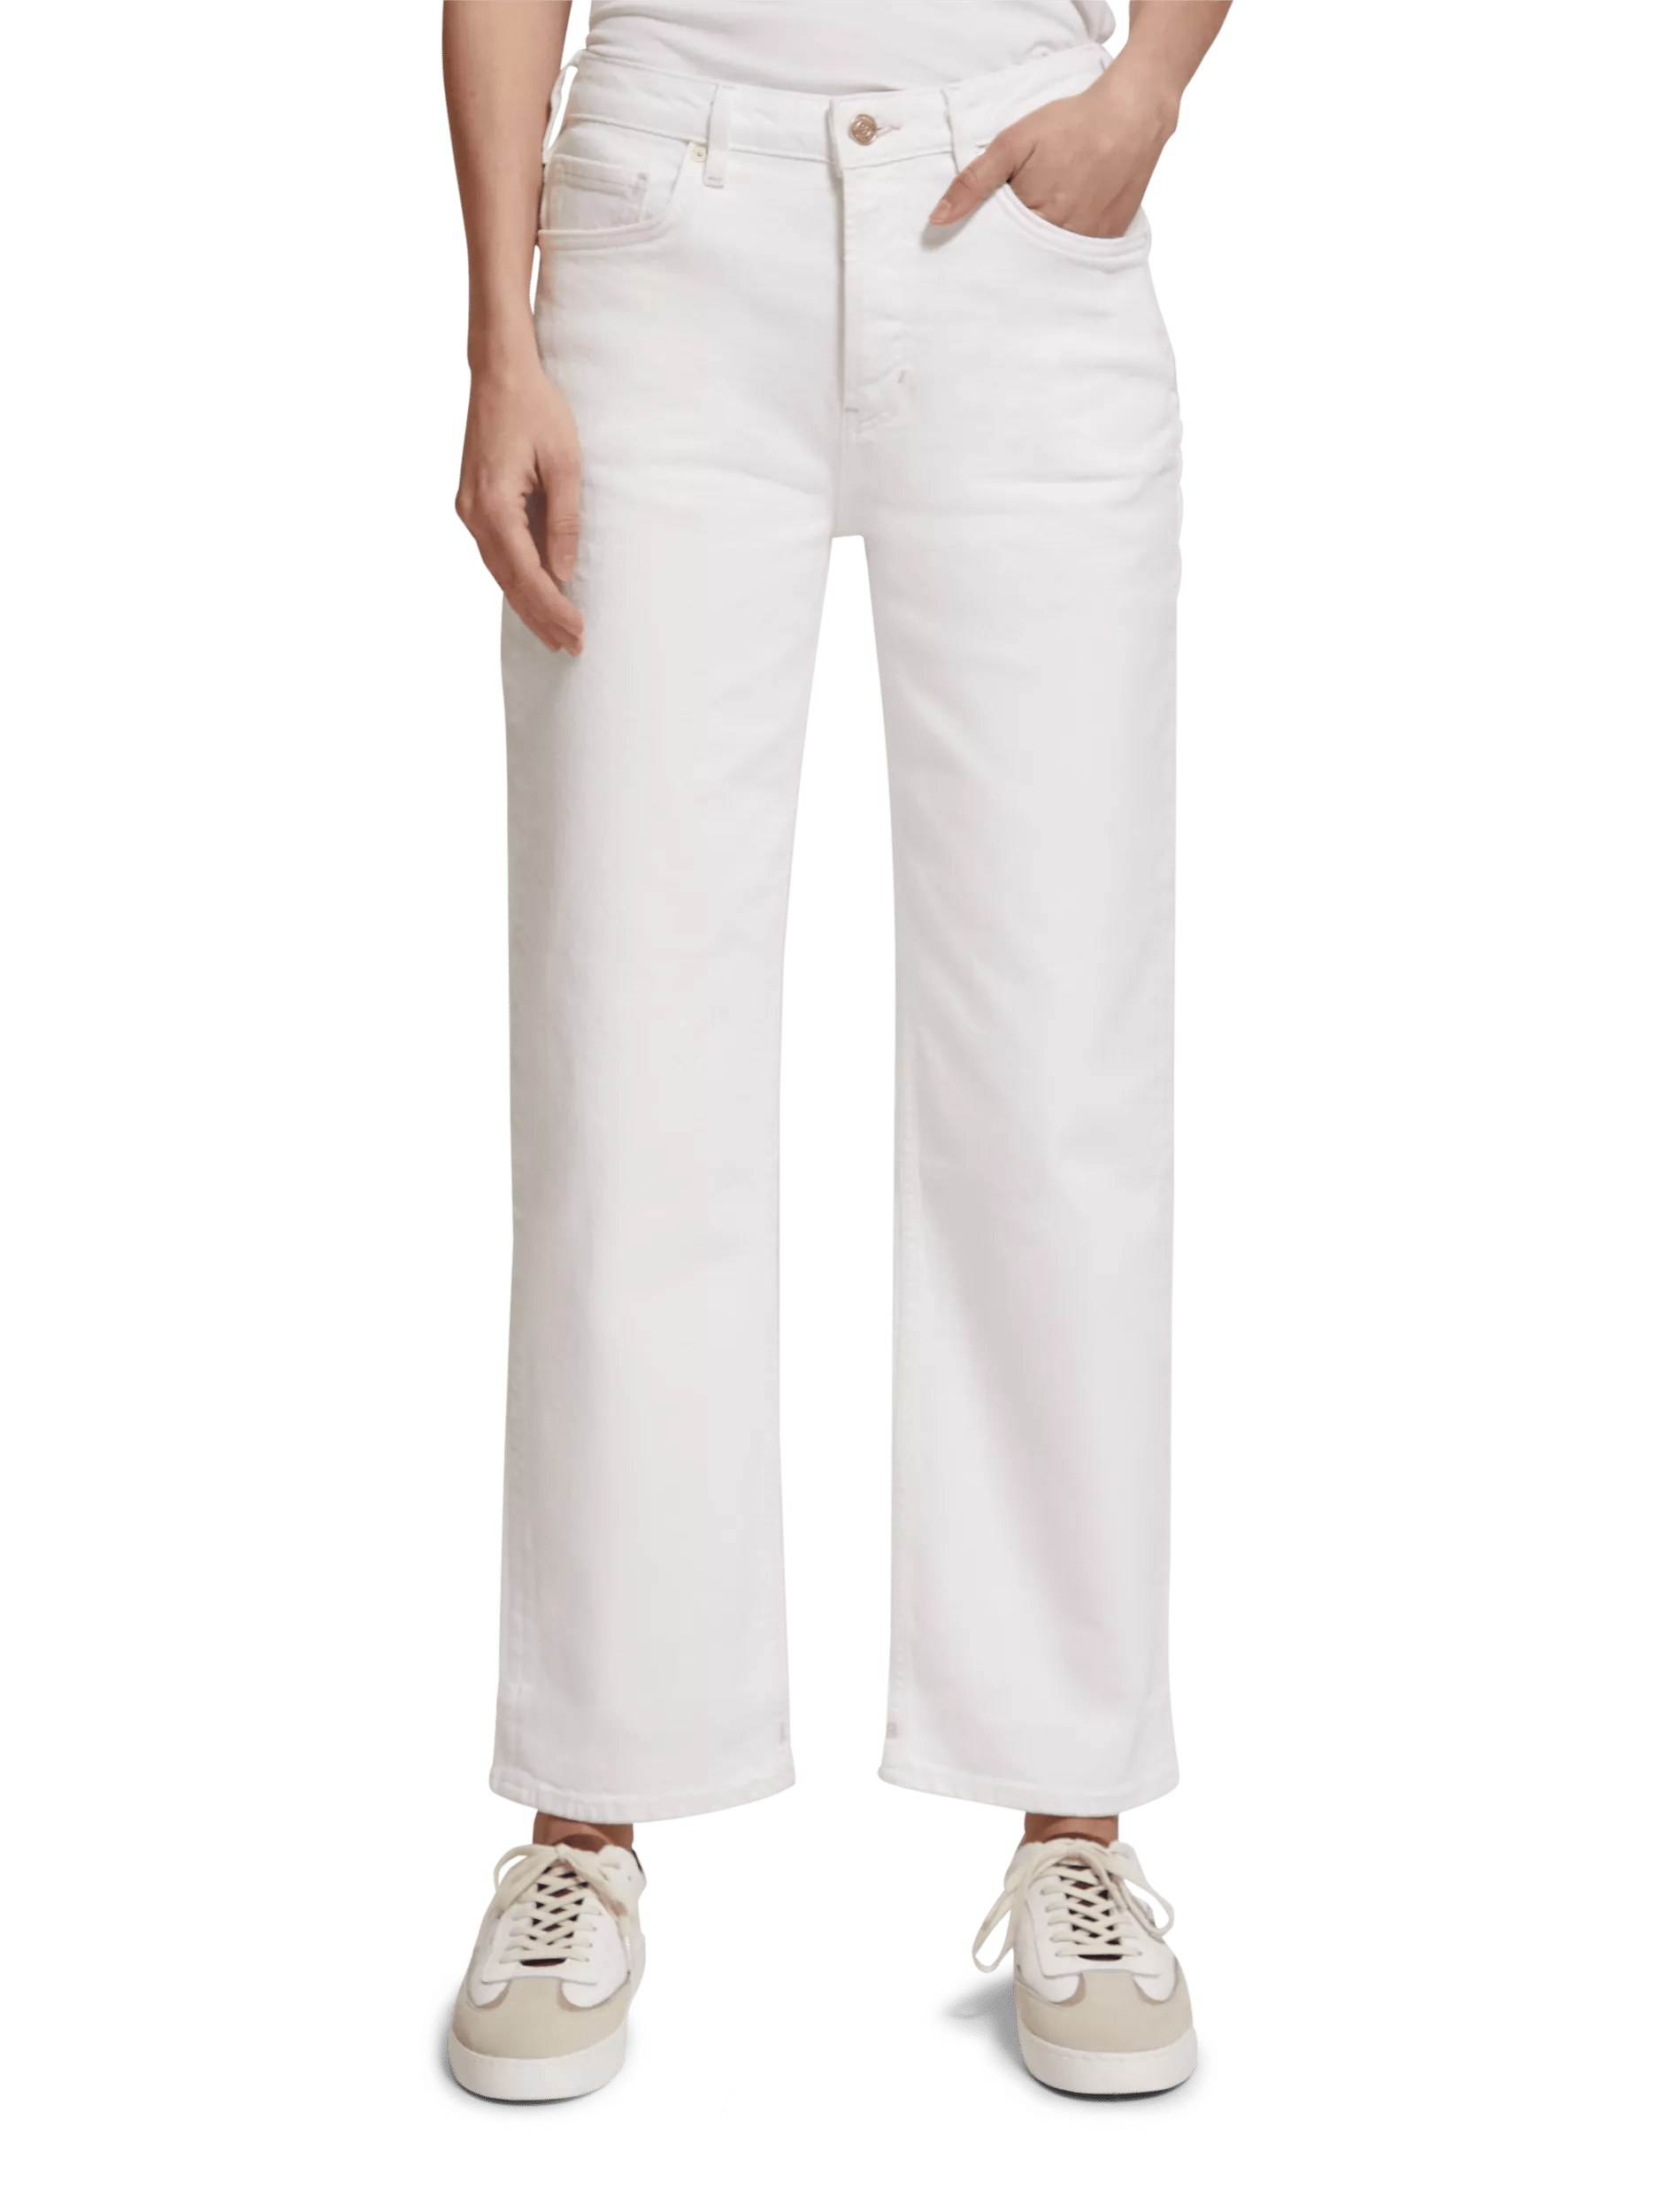 Scotch & Soda The Sky High-Rise Jeans mit geradem Bein FIT-CRP